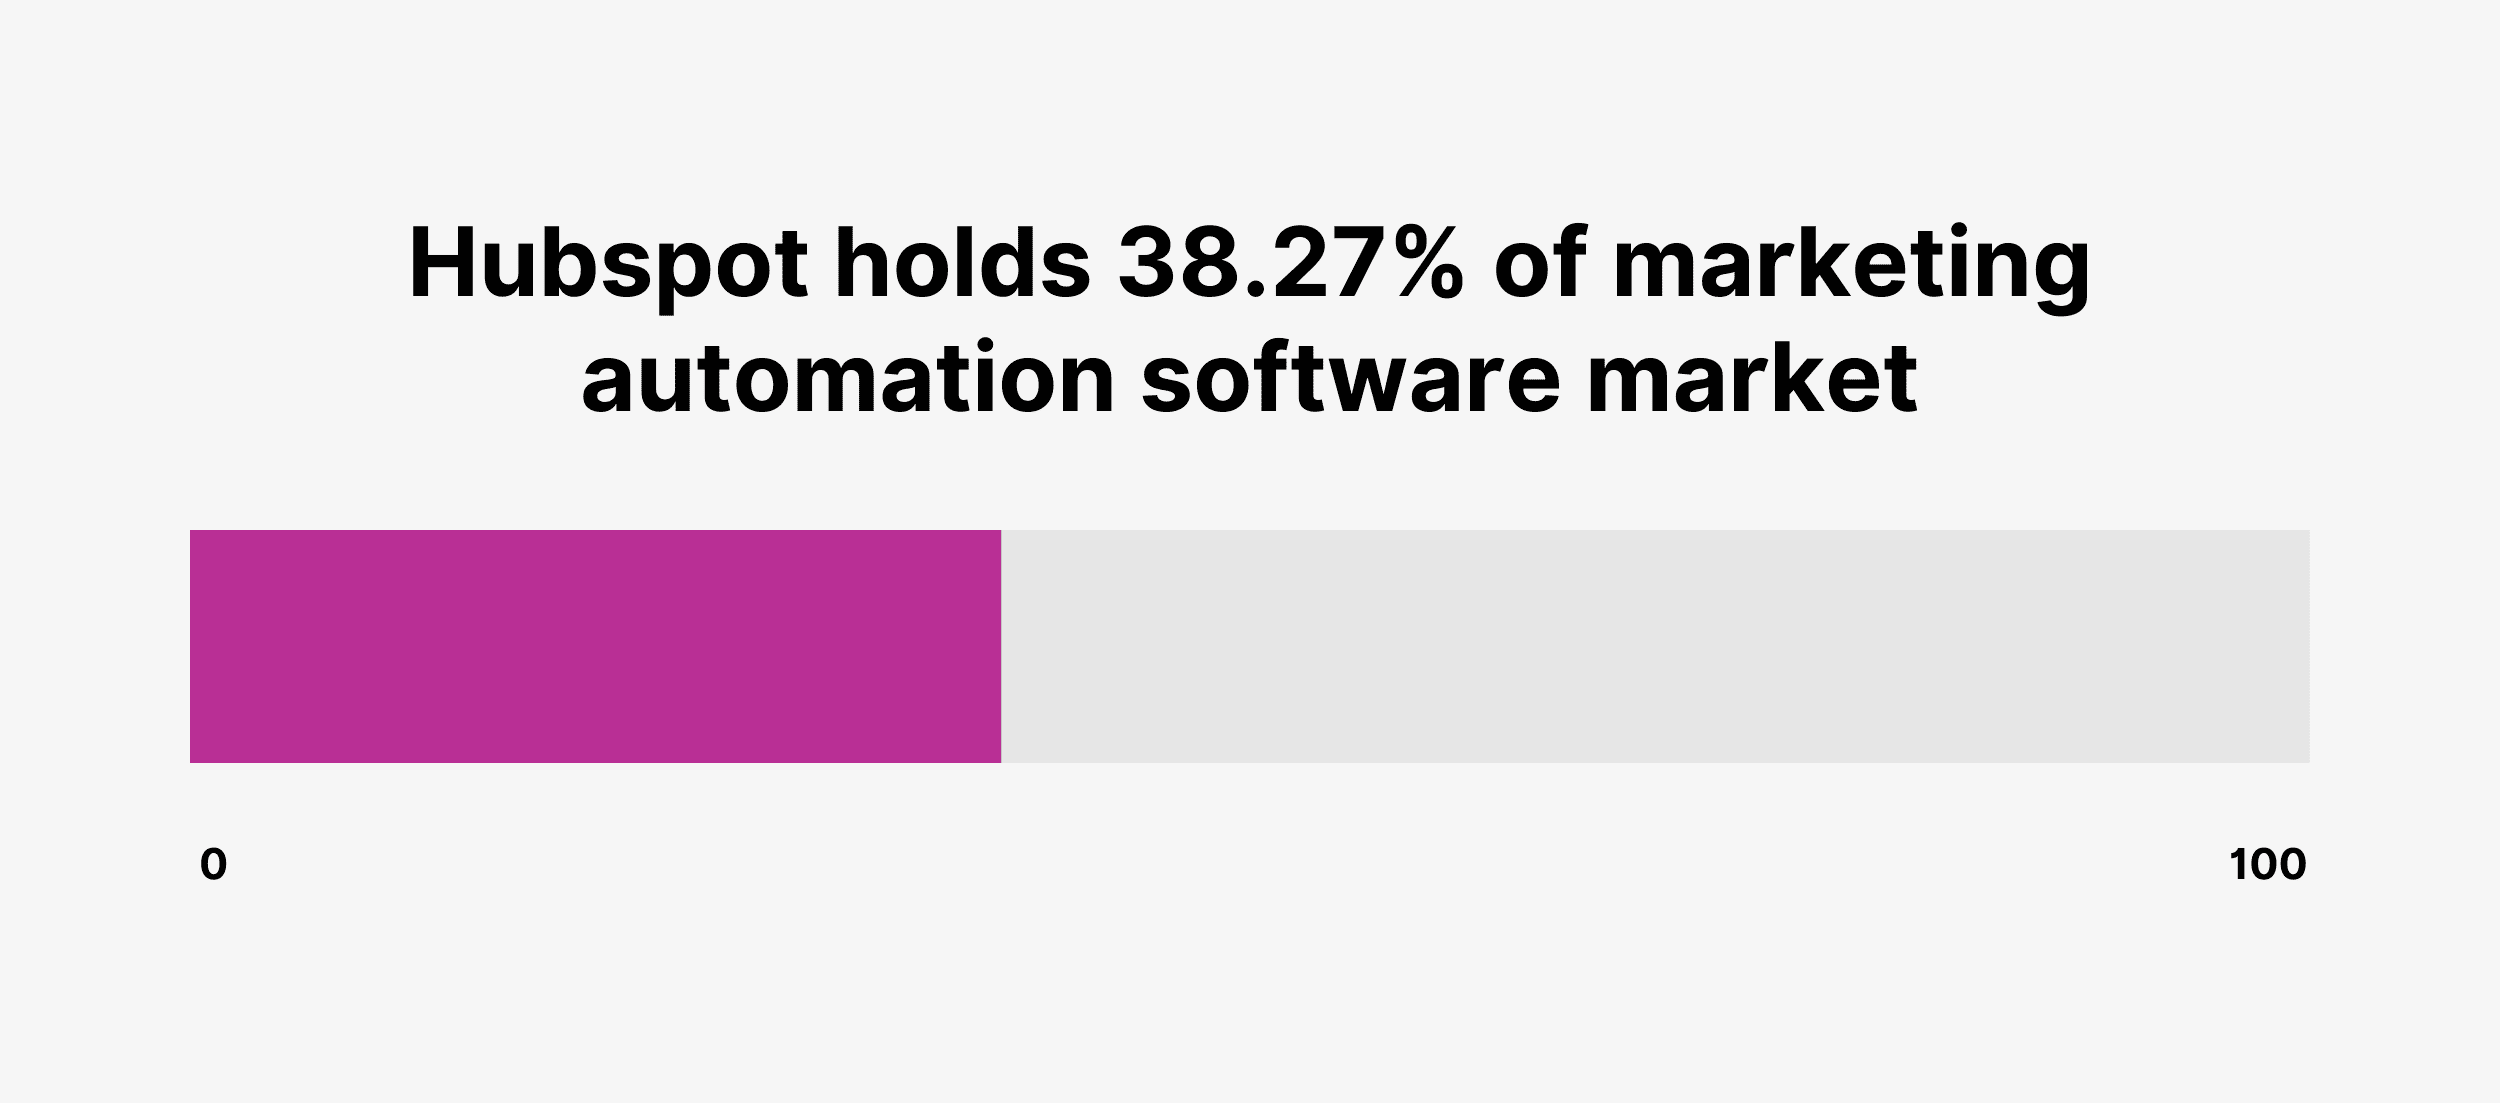 Hubspot holds 38.27% of marketing automation software market